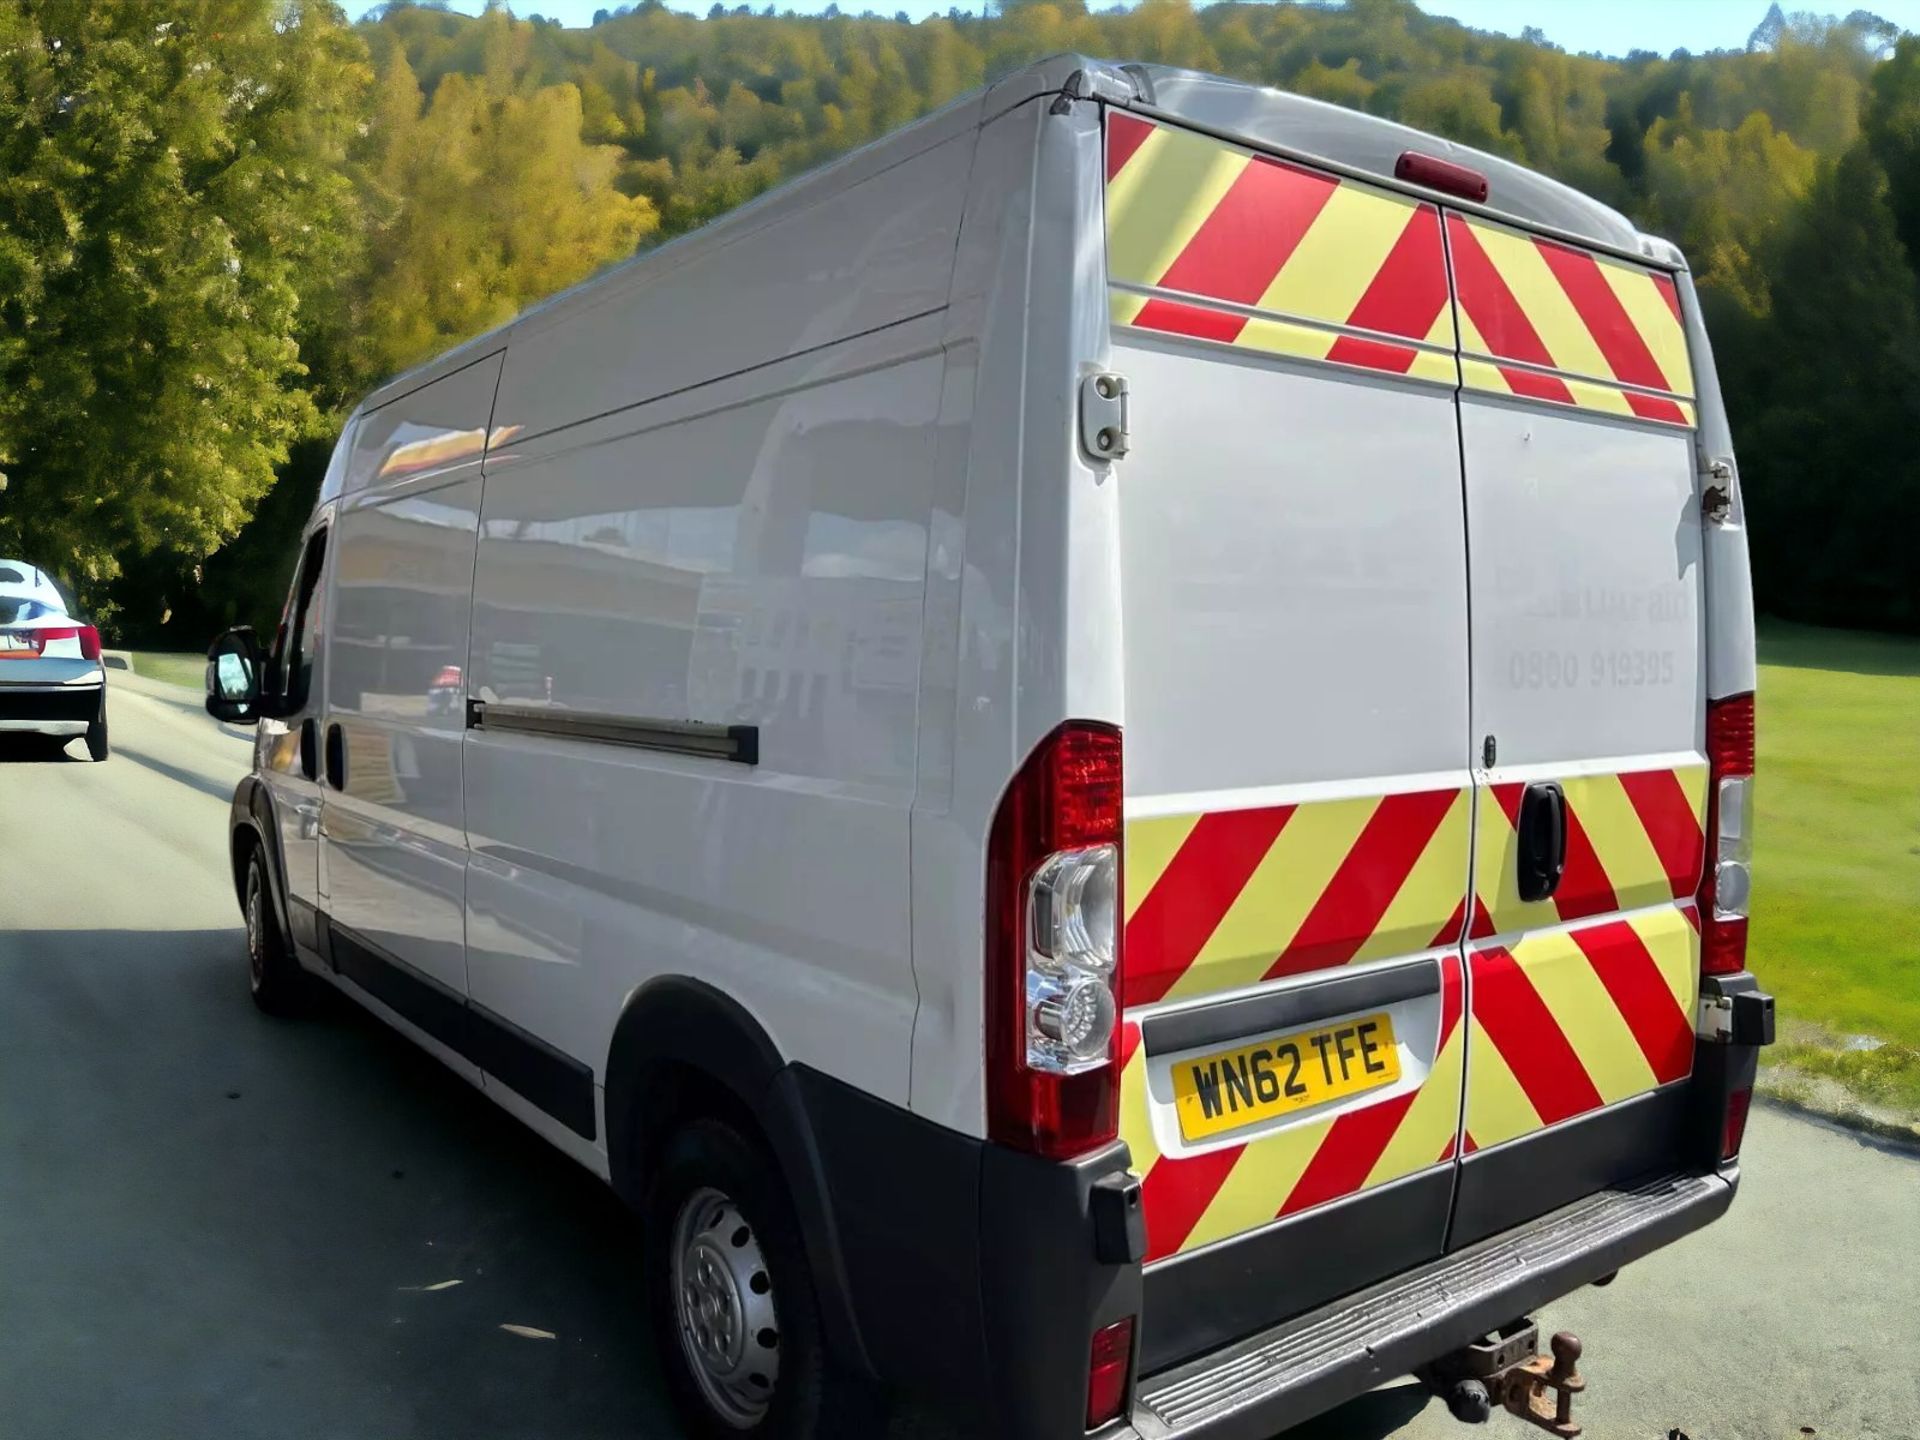 2013 FIAT DUCATO 35 MULTI JET LWB L3H2 - HPI CLEAR - READY TO GO! - Image 5 of 10